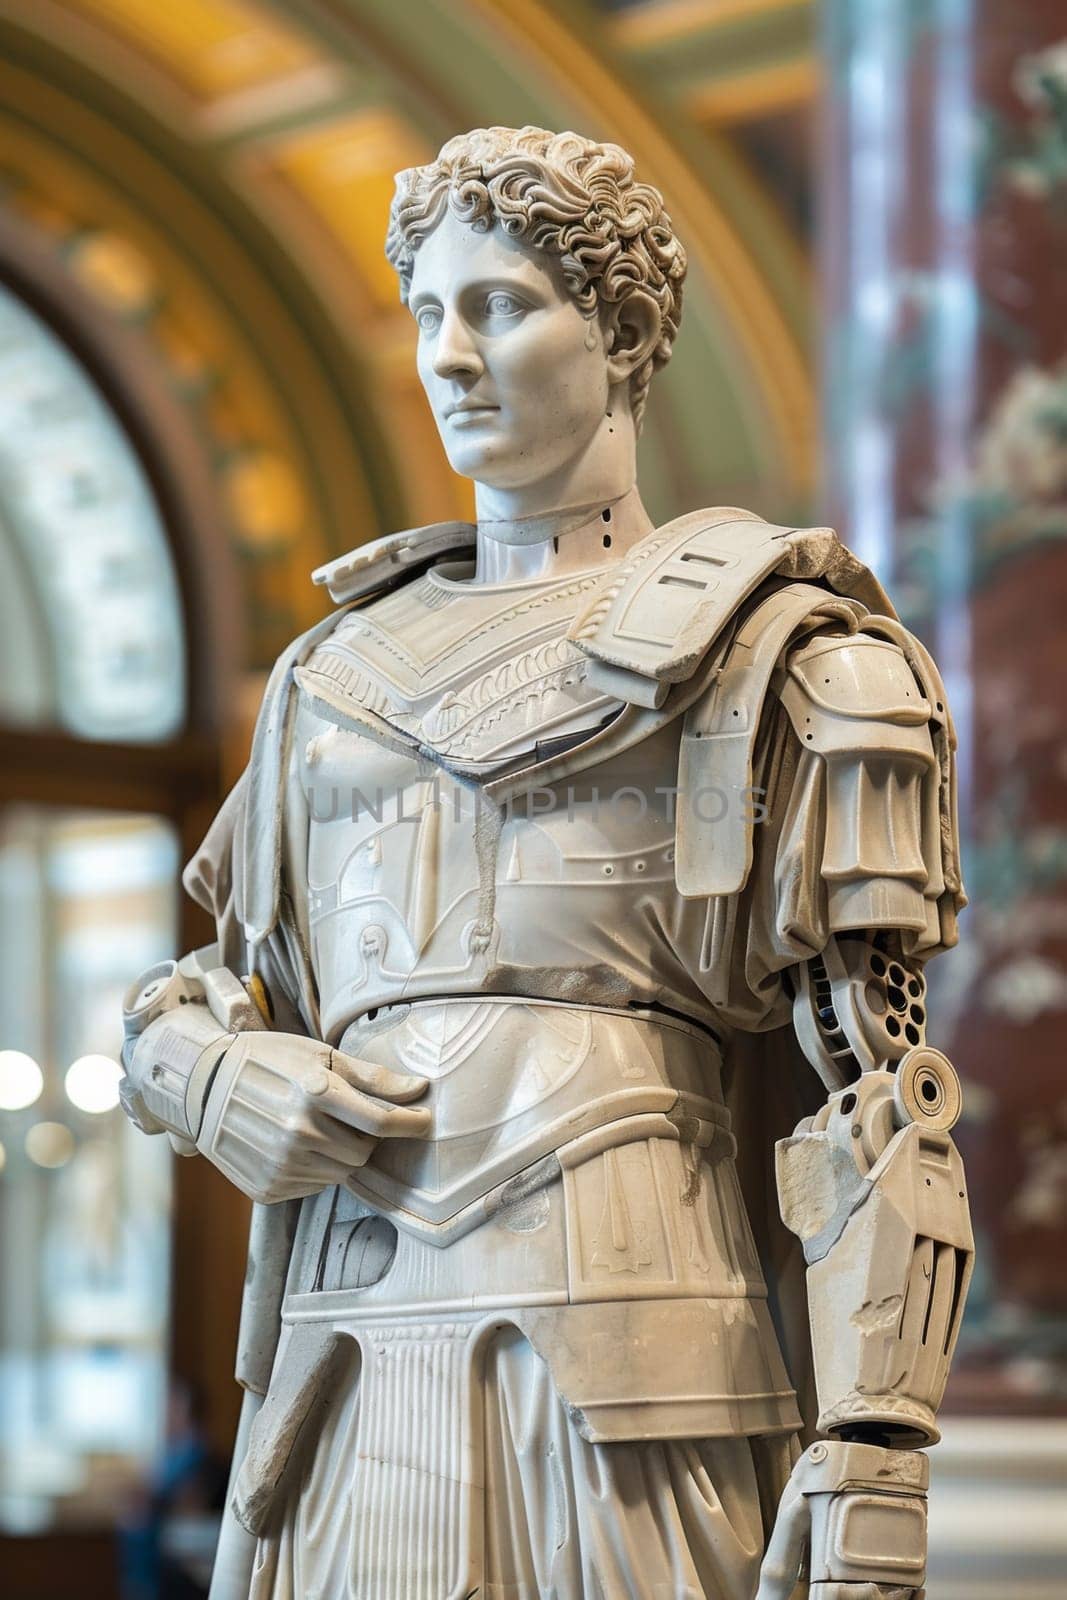 a fictional statue of a man in armor standing next to some other statues